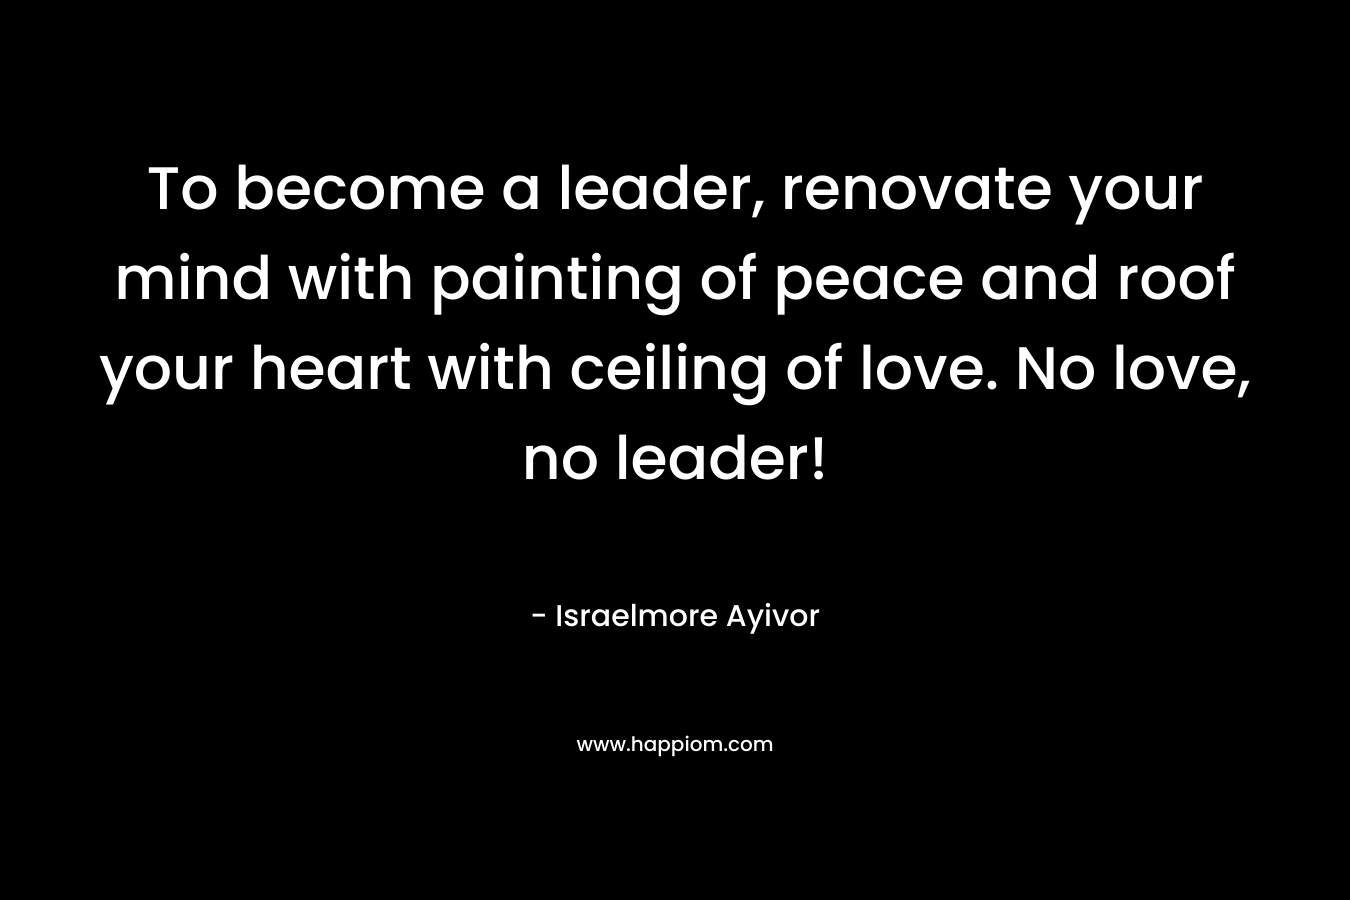 To become a leader, renovate your mind with painting of peace and roof your heart with ceiling of love. No love, no leader! – Israelmore Ayivor